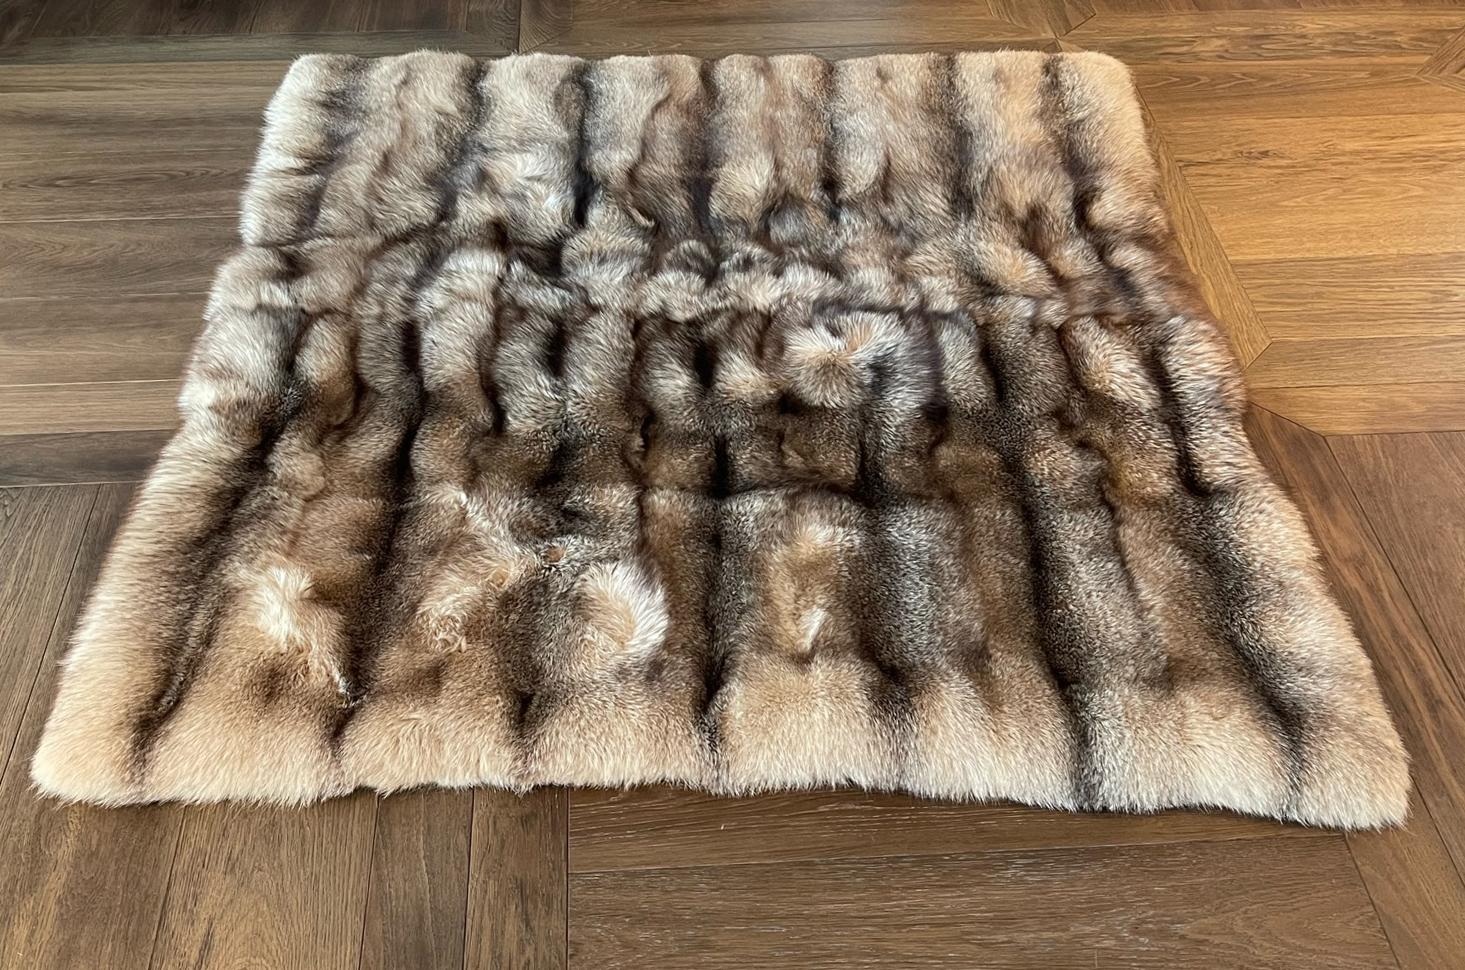 Fox fur throw.

An exquisite example of Haute-Fourriere' craftsmanship the fox fur blanket has been hand made from the finest collection of handpicked crystal fox fur pelts. The blanket has been made with 'full pelts' which gives it the wonderful